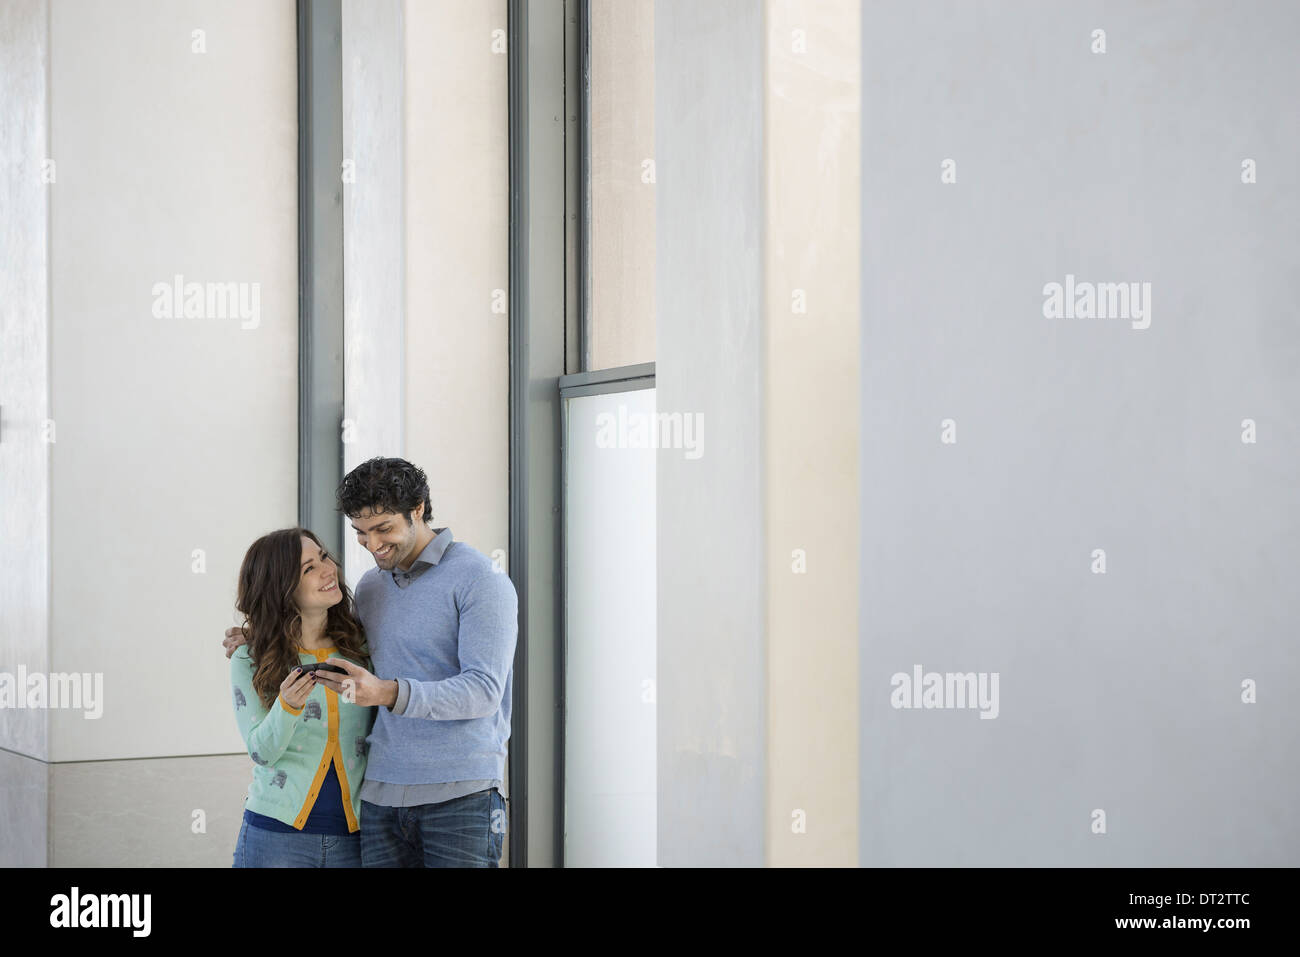 Urban Lifestyle A young couple man and woman side by side looking at a mobile phone Stock Photo